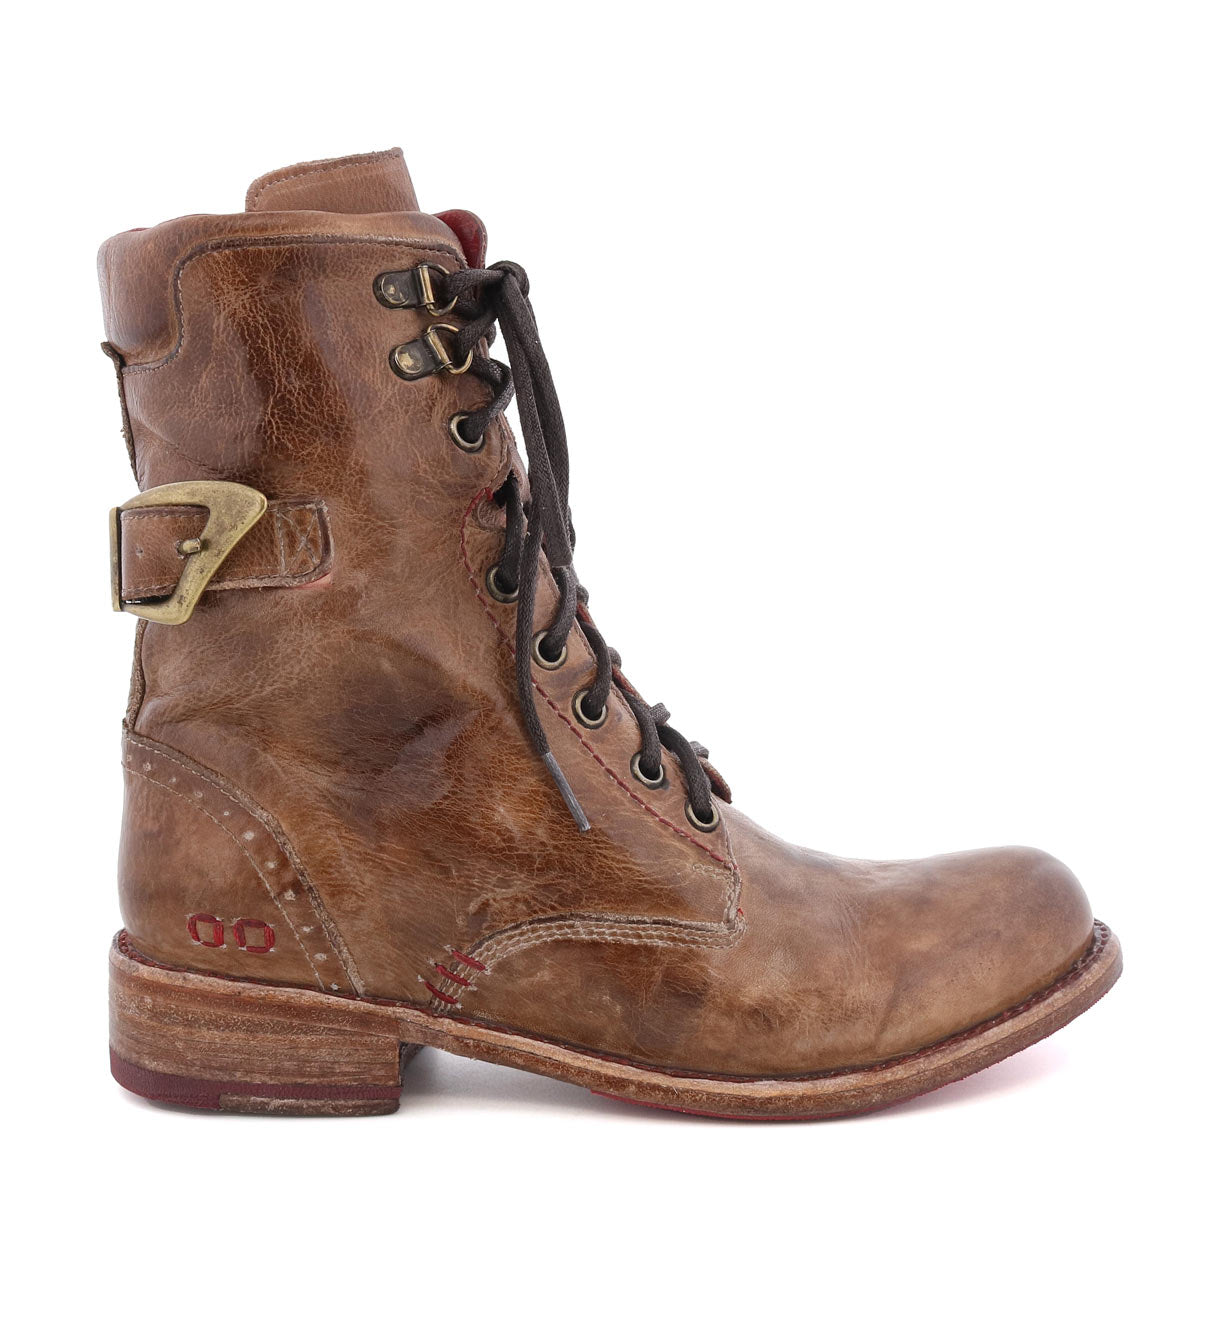 A women's brown leather boot with metal buckles called Anne by Bed Stu.